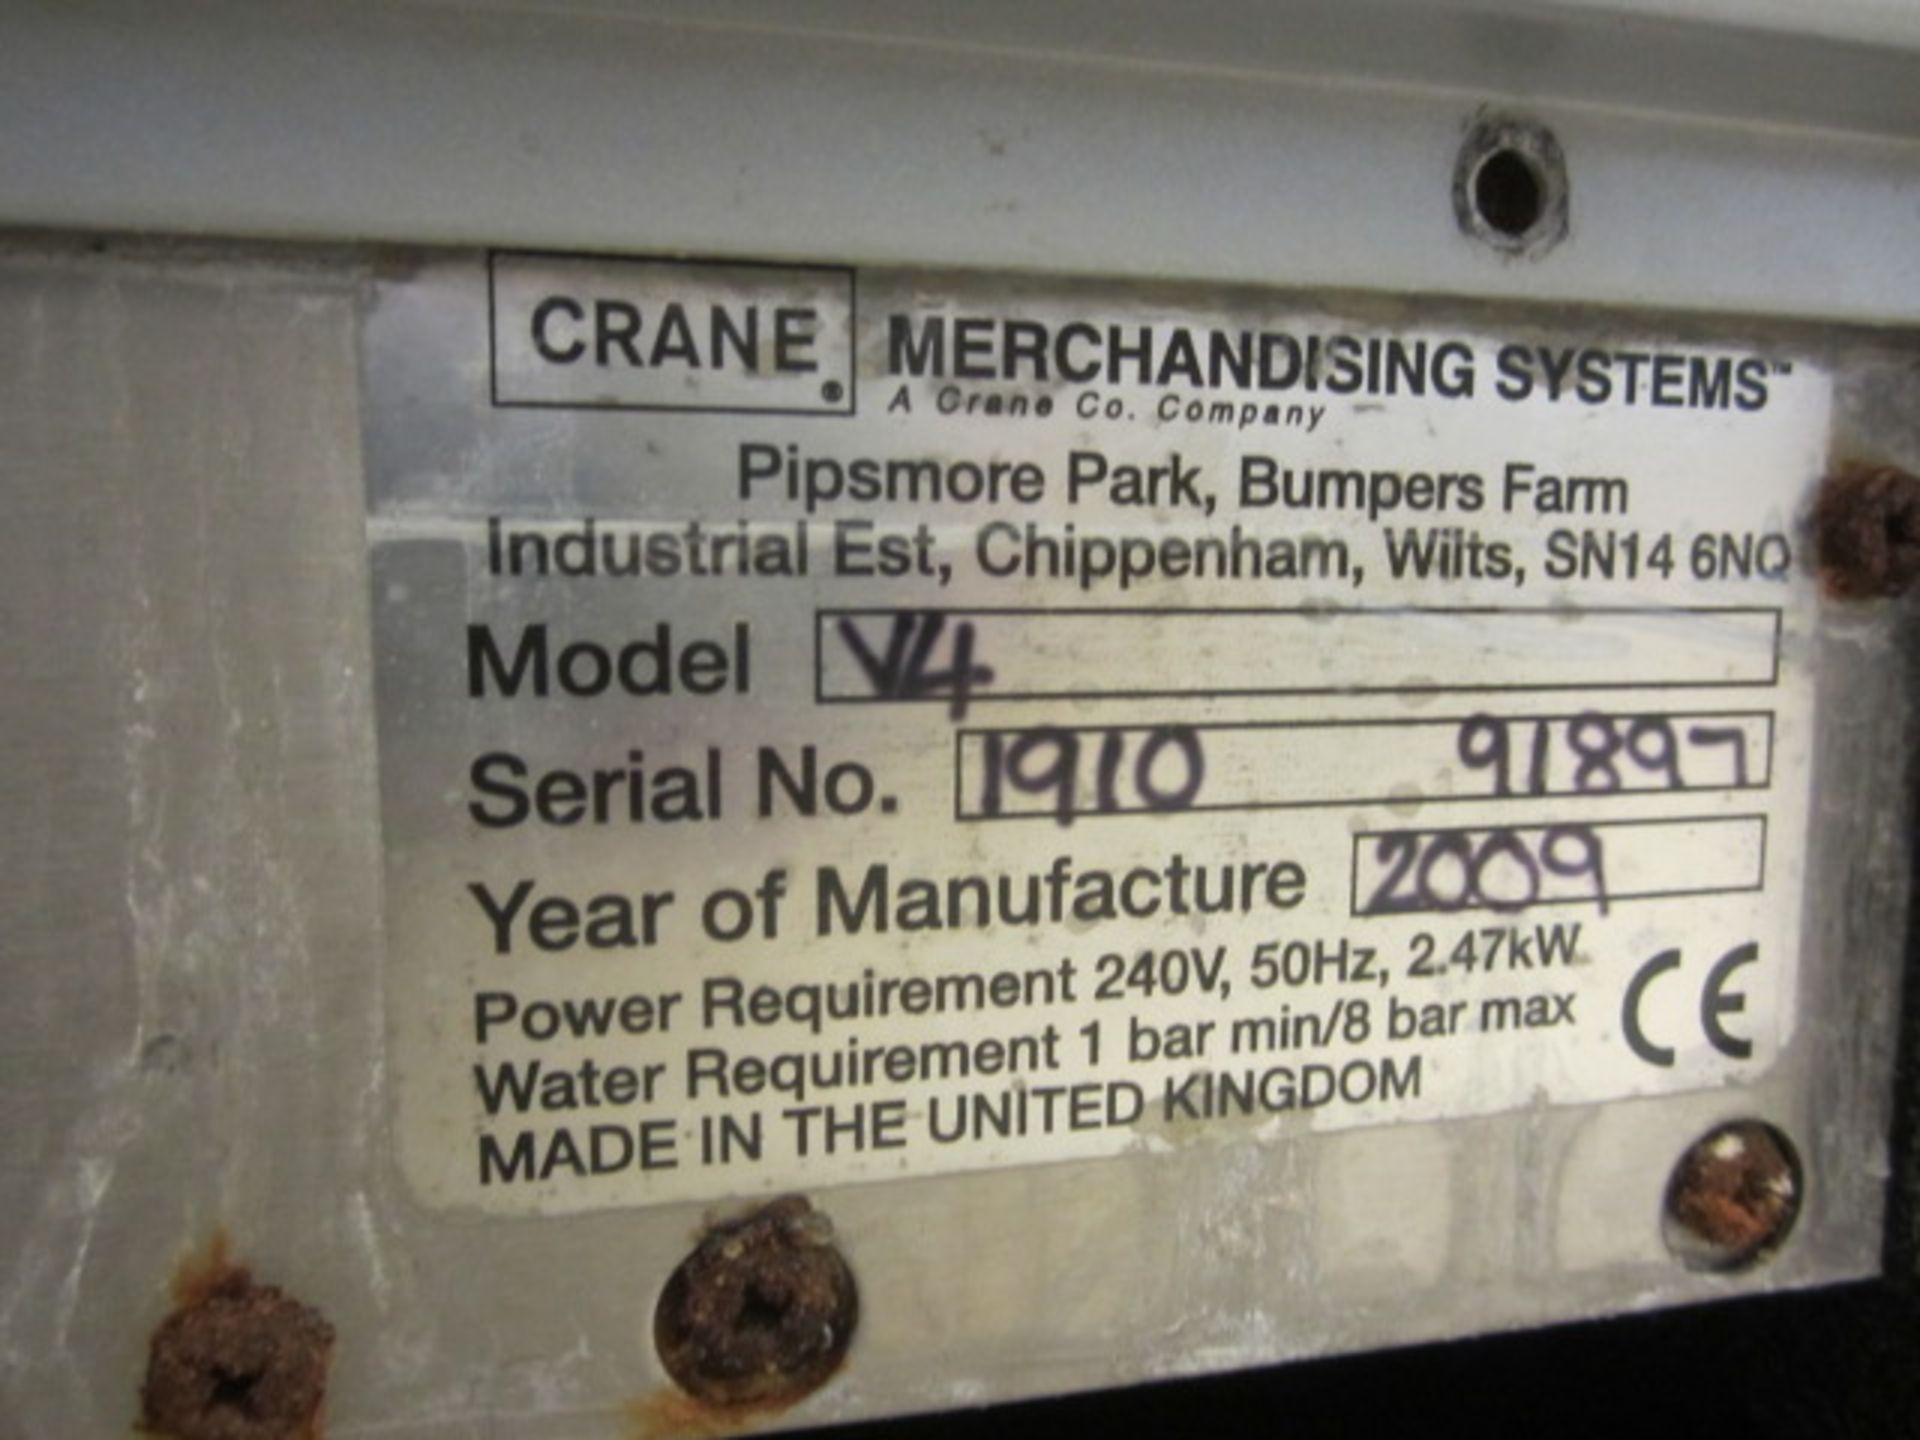 Crane Merchandising Systems hot drinks machine, model V4, serial no. 191091897, mounted on - Image 3 of 3